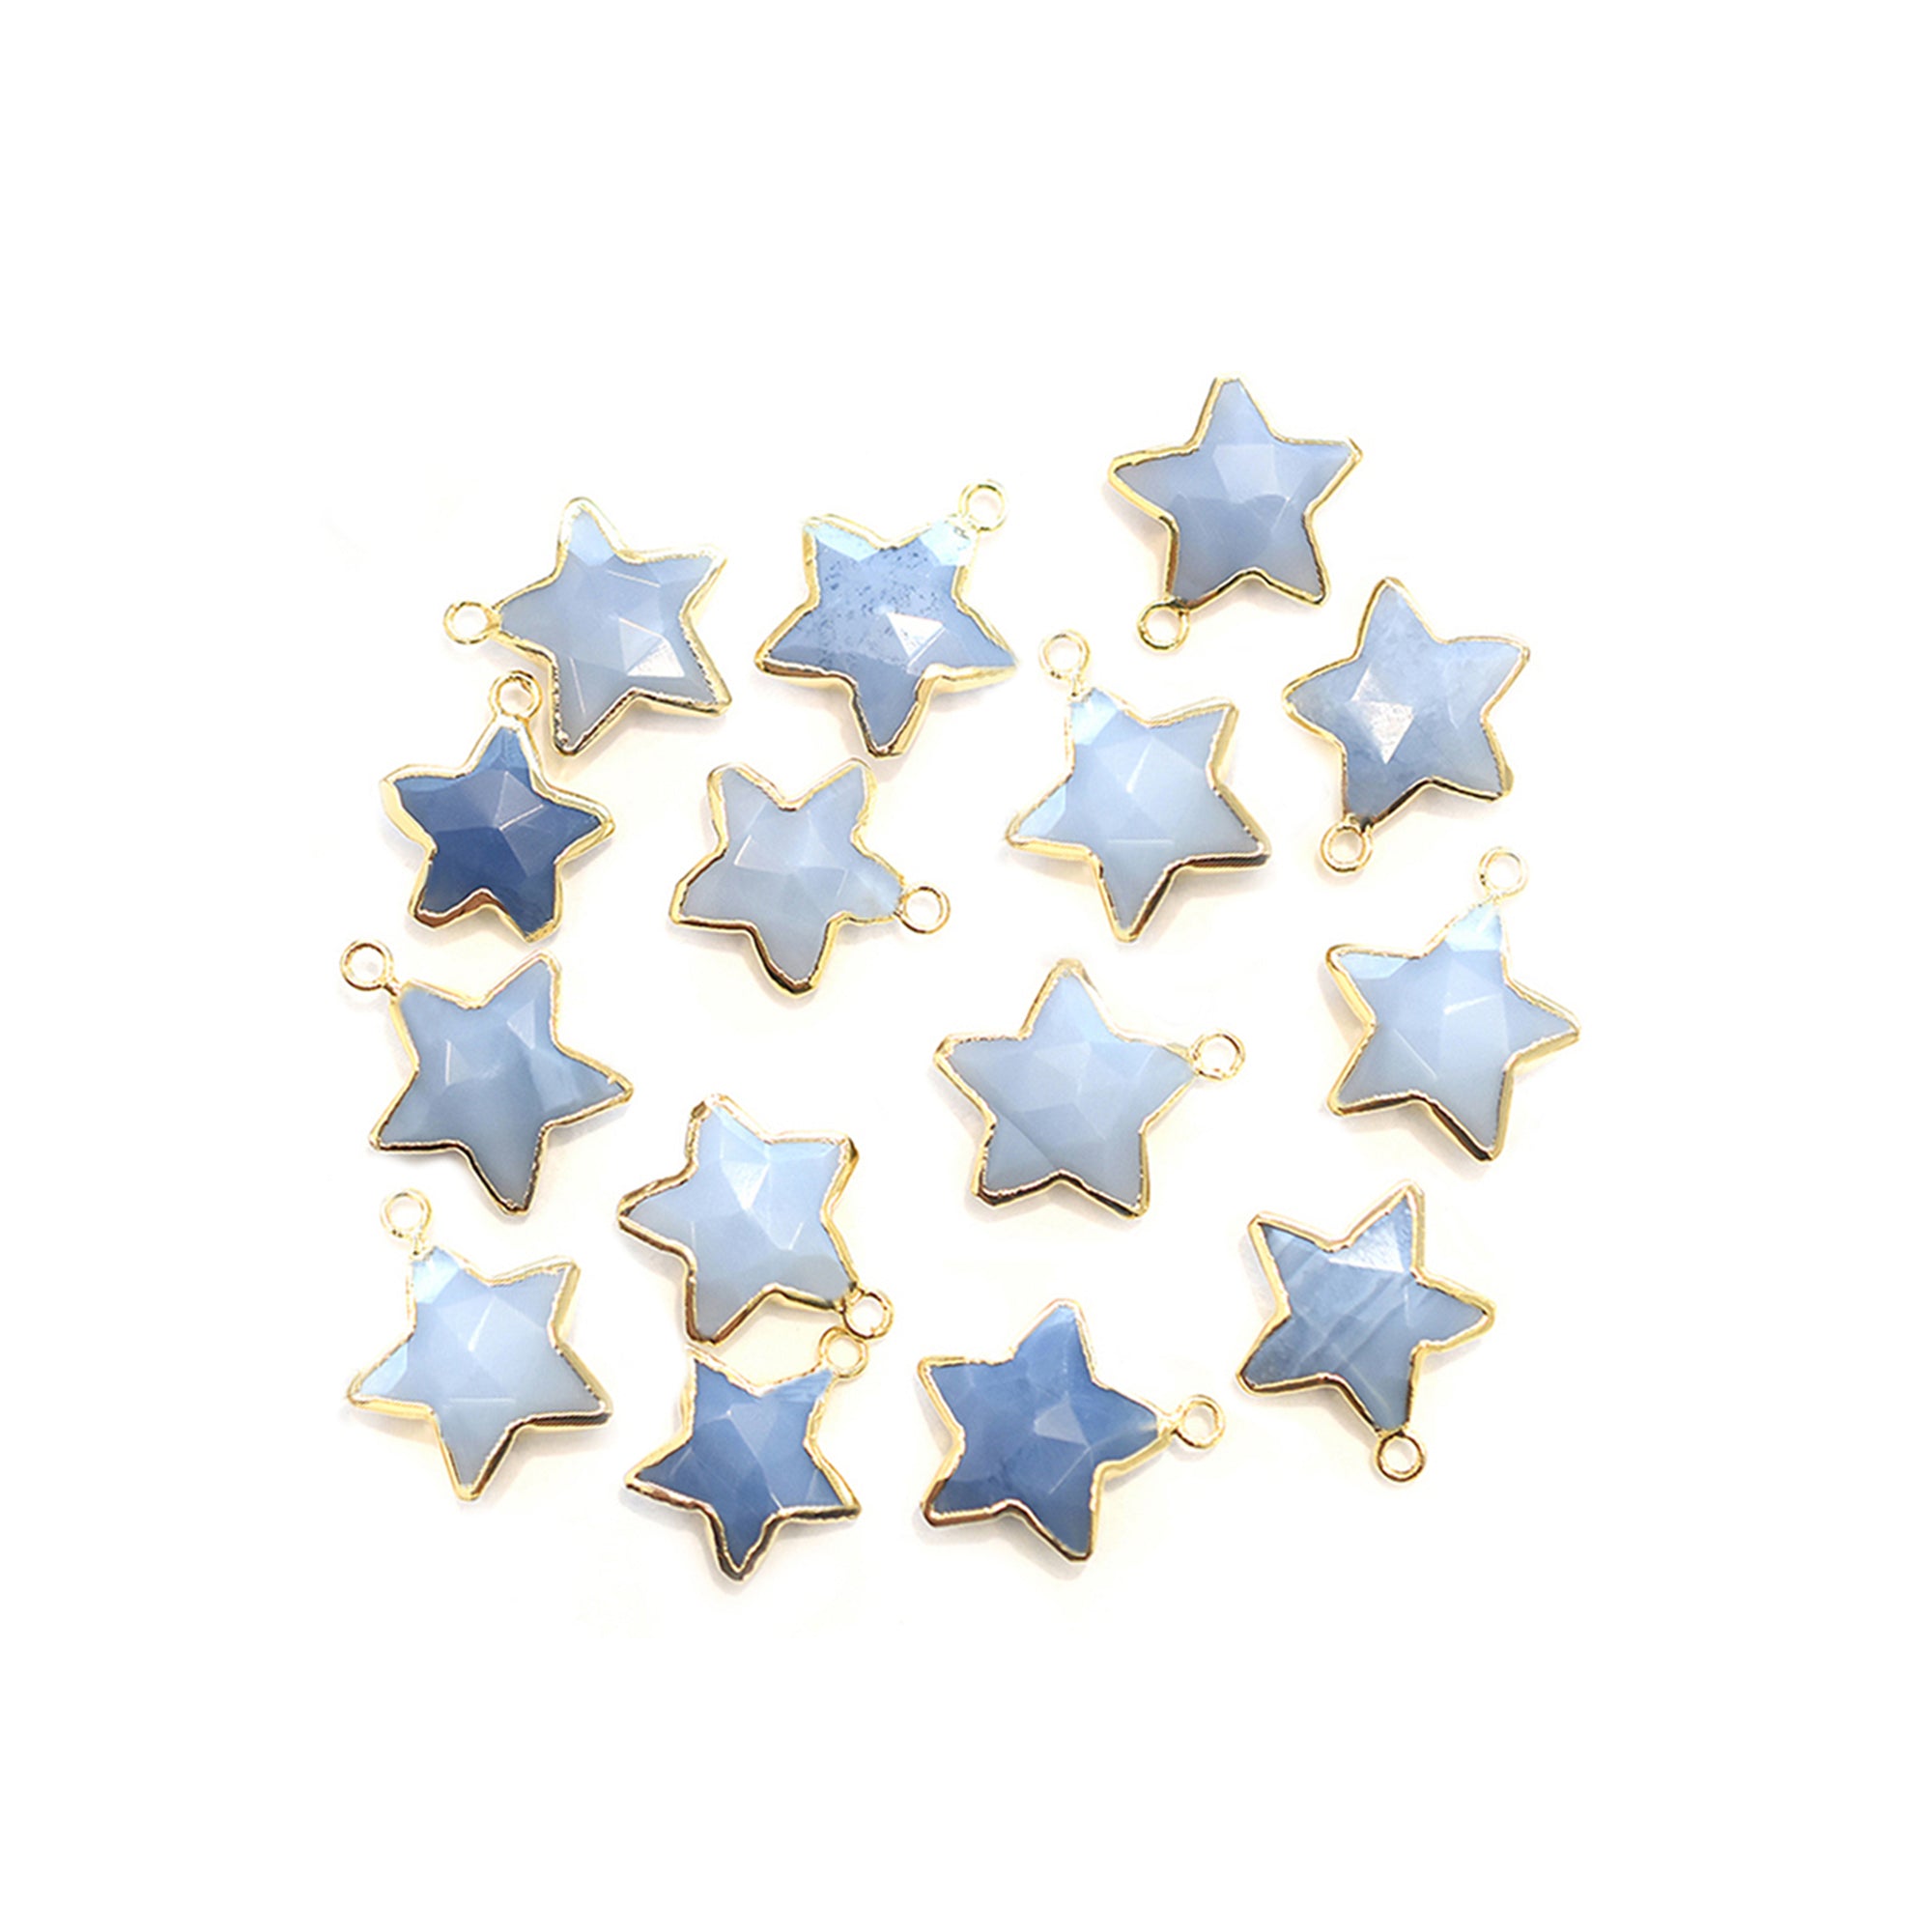 Blue Opal 10 To 11 MM Star Shape Gold Electroplated Pendant (Set Of 2 Pcs)